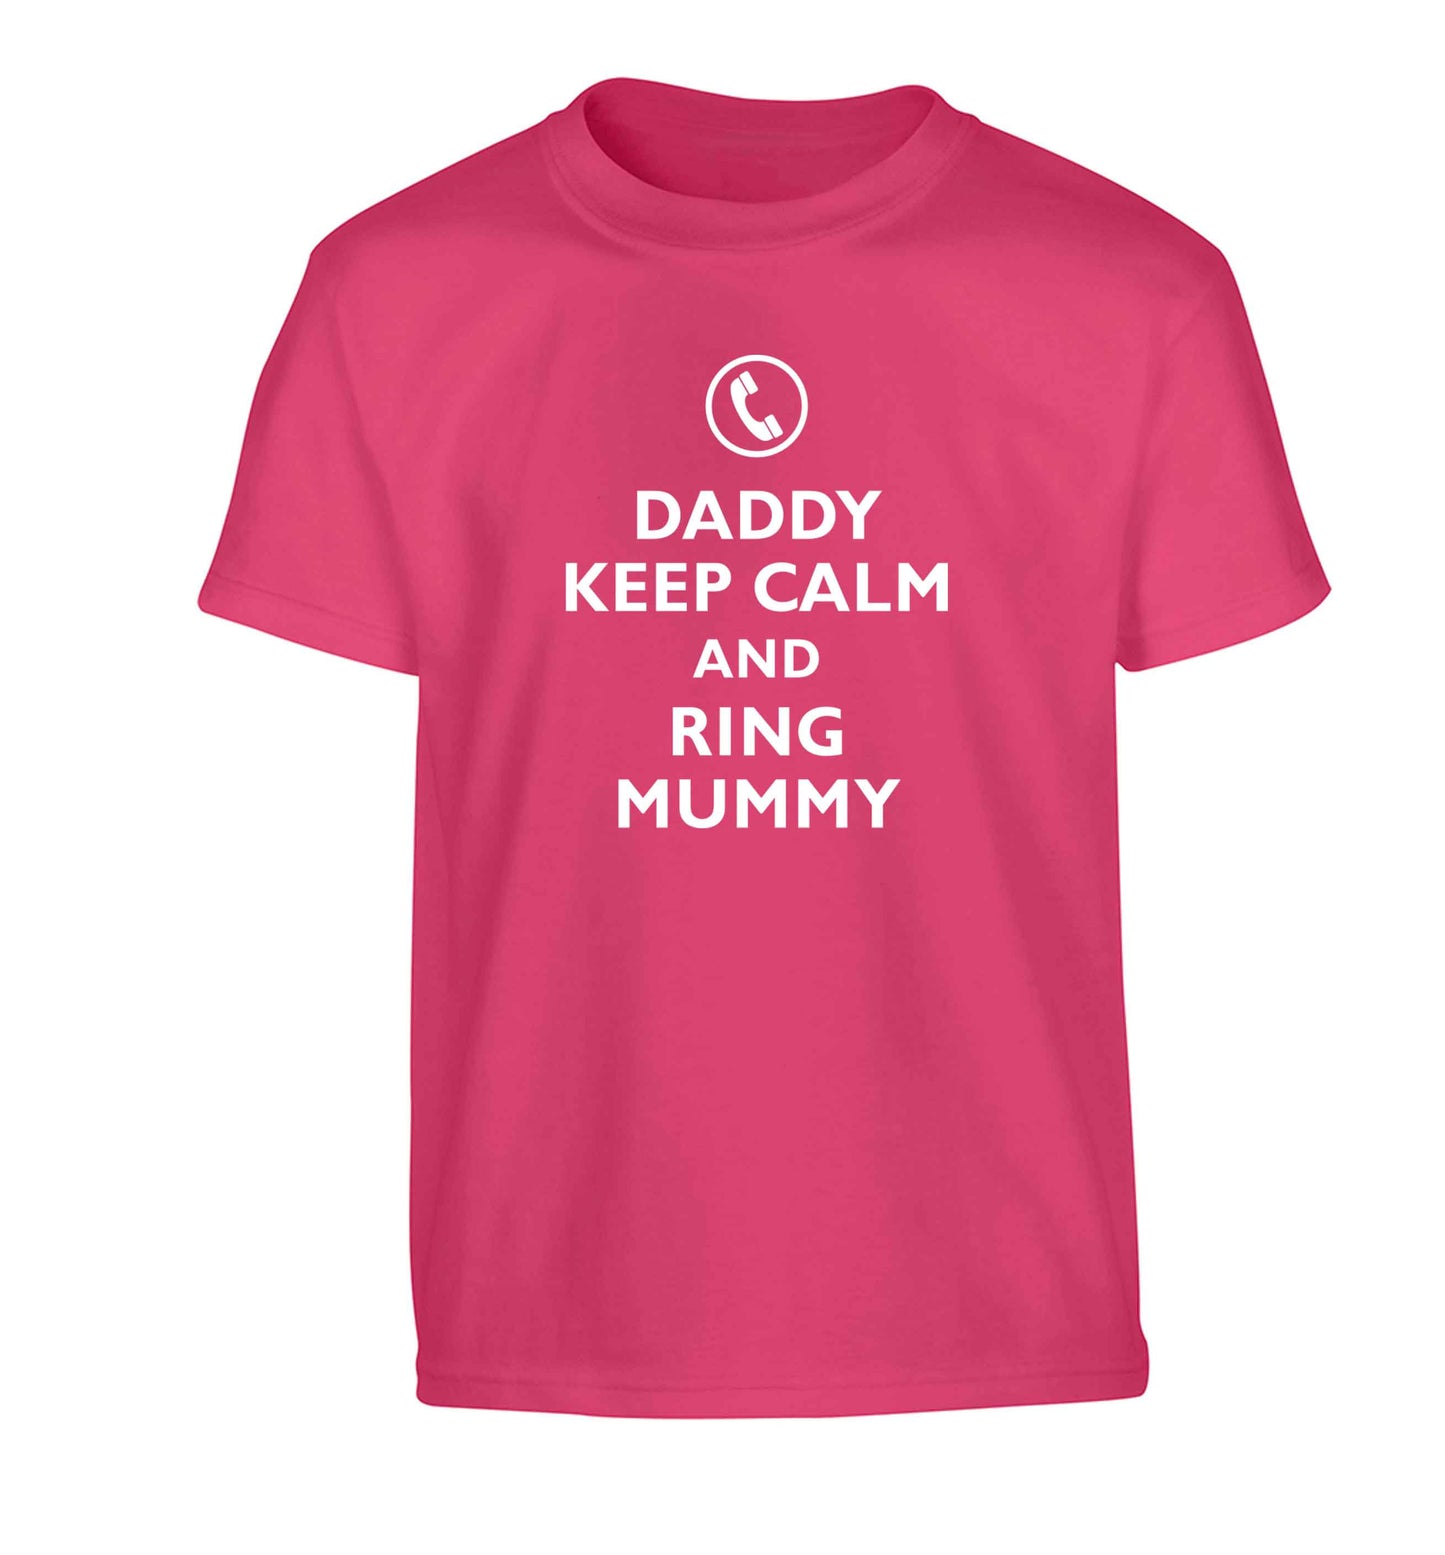 Daddy keep calm and ring mummy Children's pink Tshirt 12-13 Years